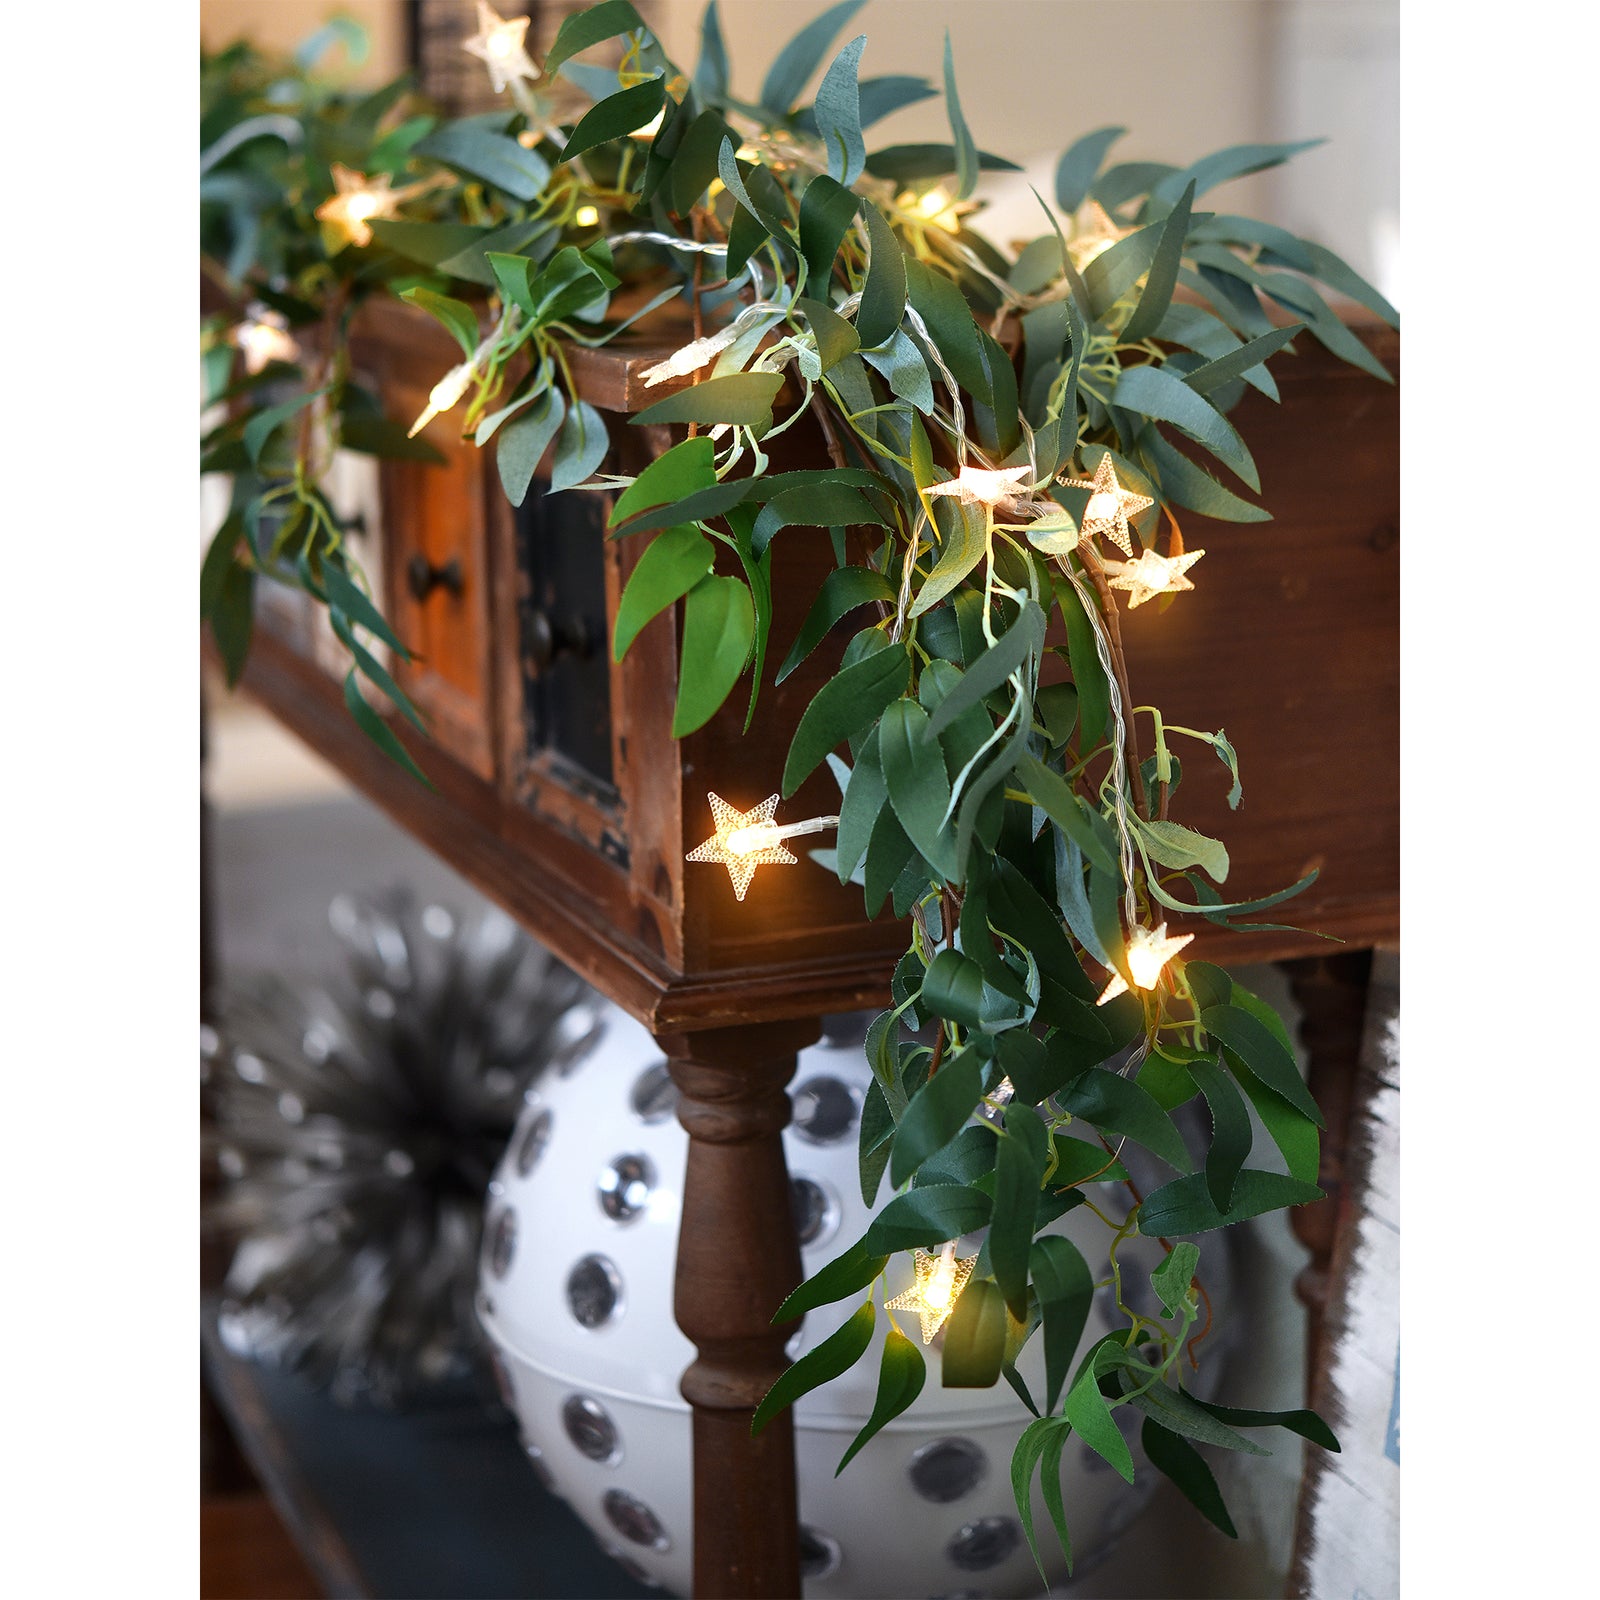 Enchanting Decor: Pair of Flexible Rustic Willow Garlands adorned with 33 Feet Starry String Lights (USB Operated) by FiveSeasonStuff Floral